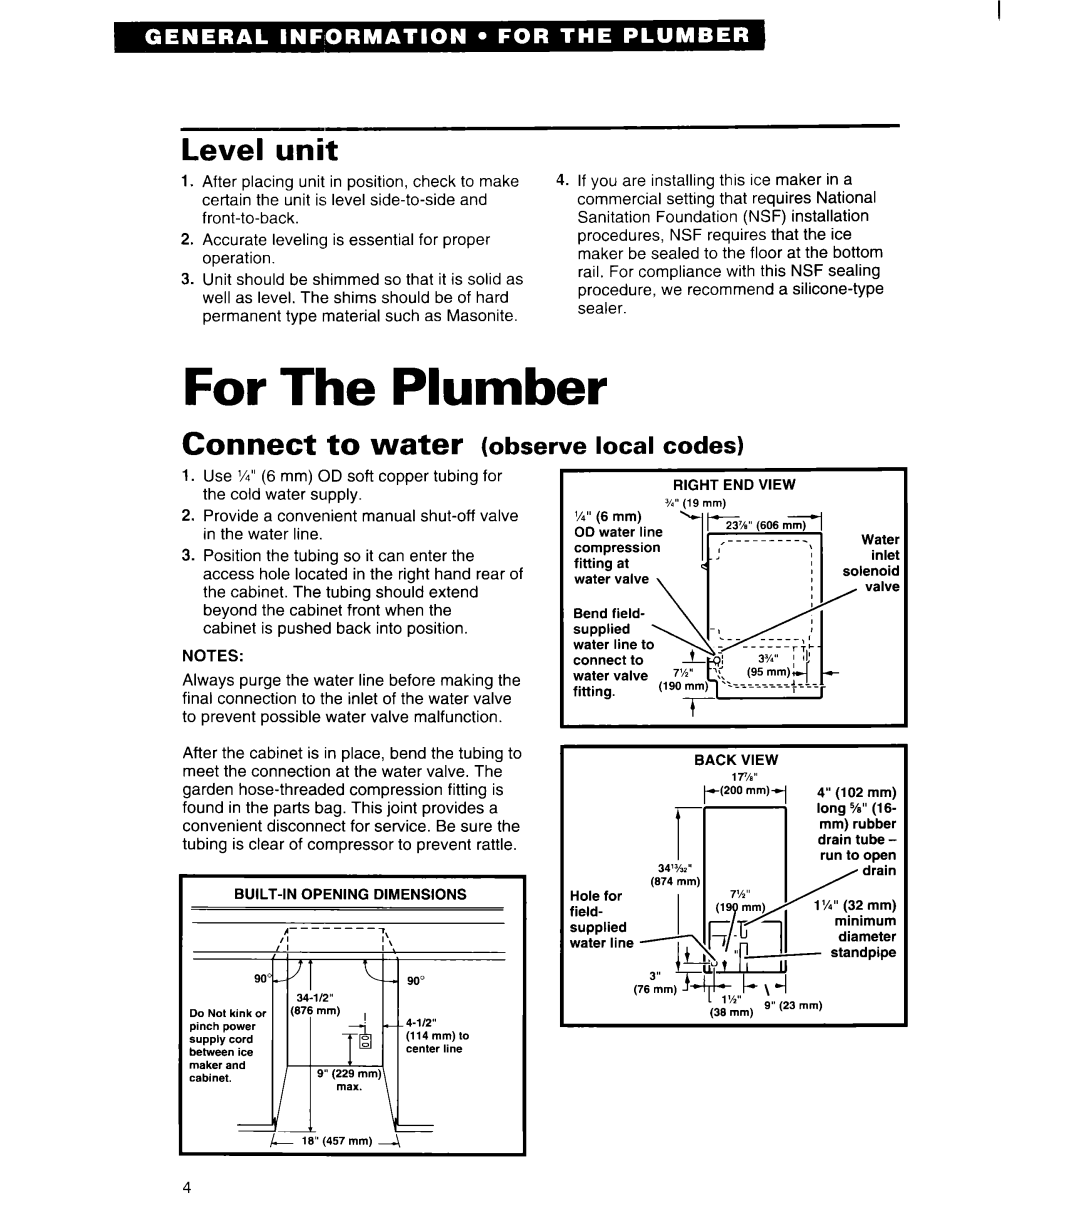 Whirlpool 2180913 manual Level unit, water observe, local codes, connect, e f$l+\-I, Plumber 